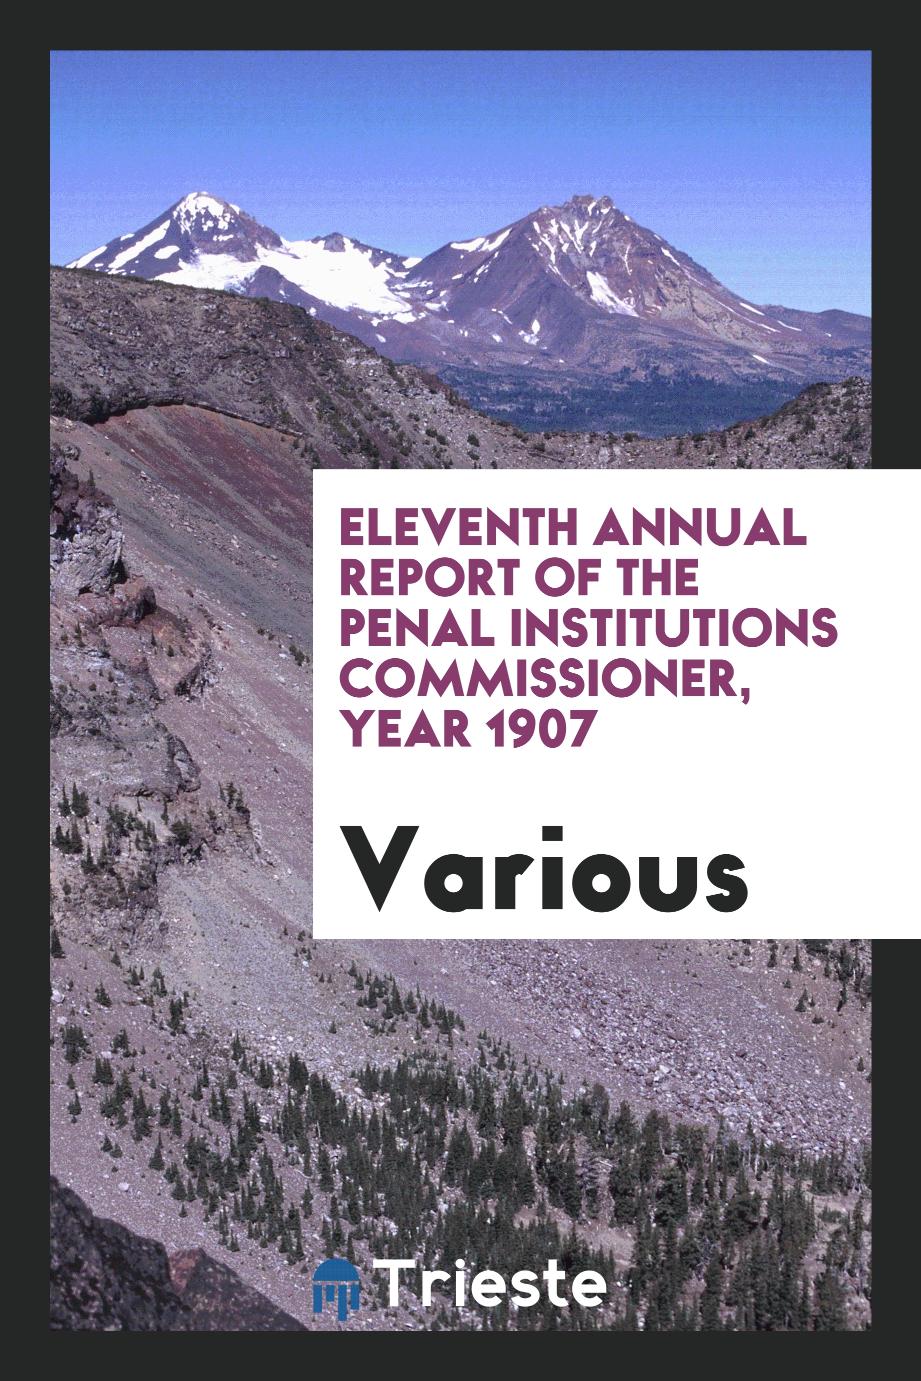 Eleventh Annual Report of the Penal Institutions Commissioner, year 1907